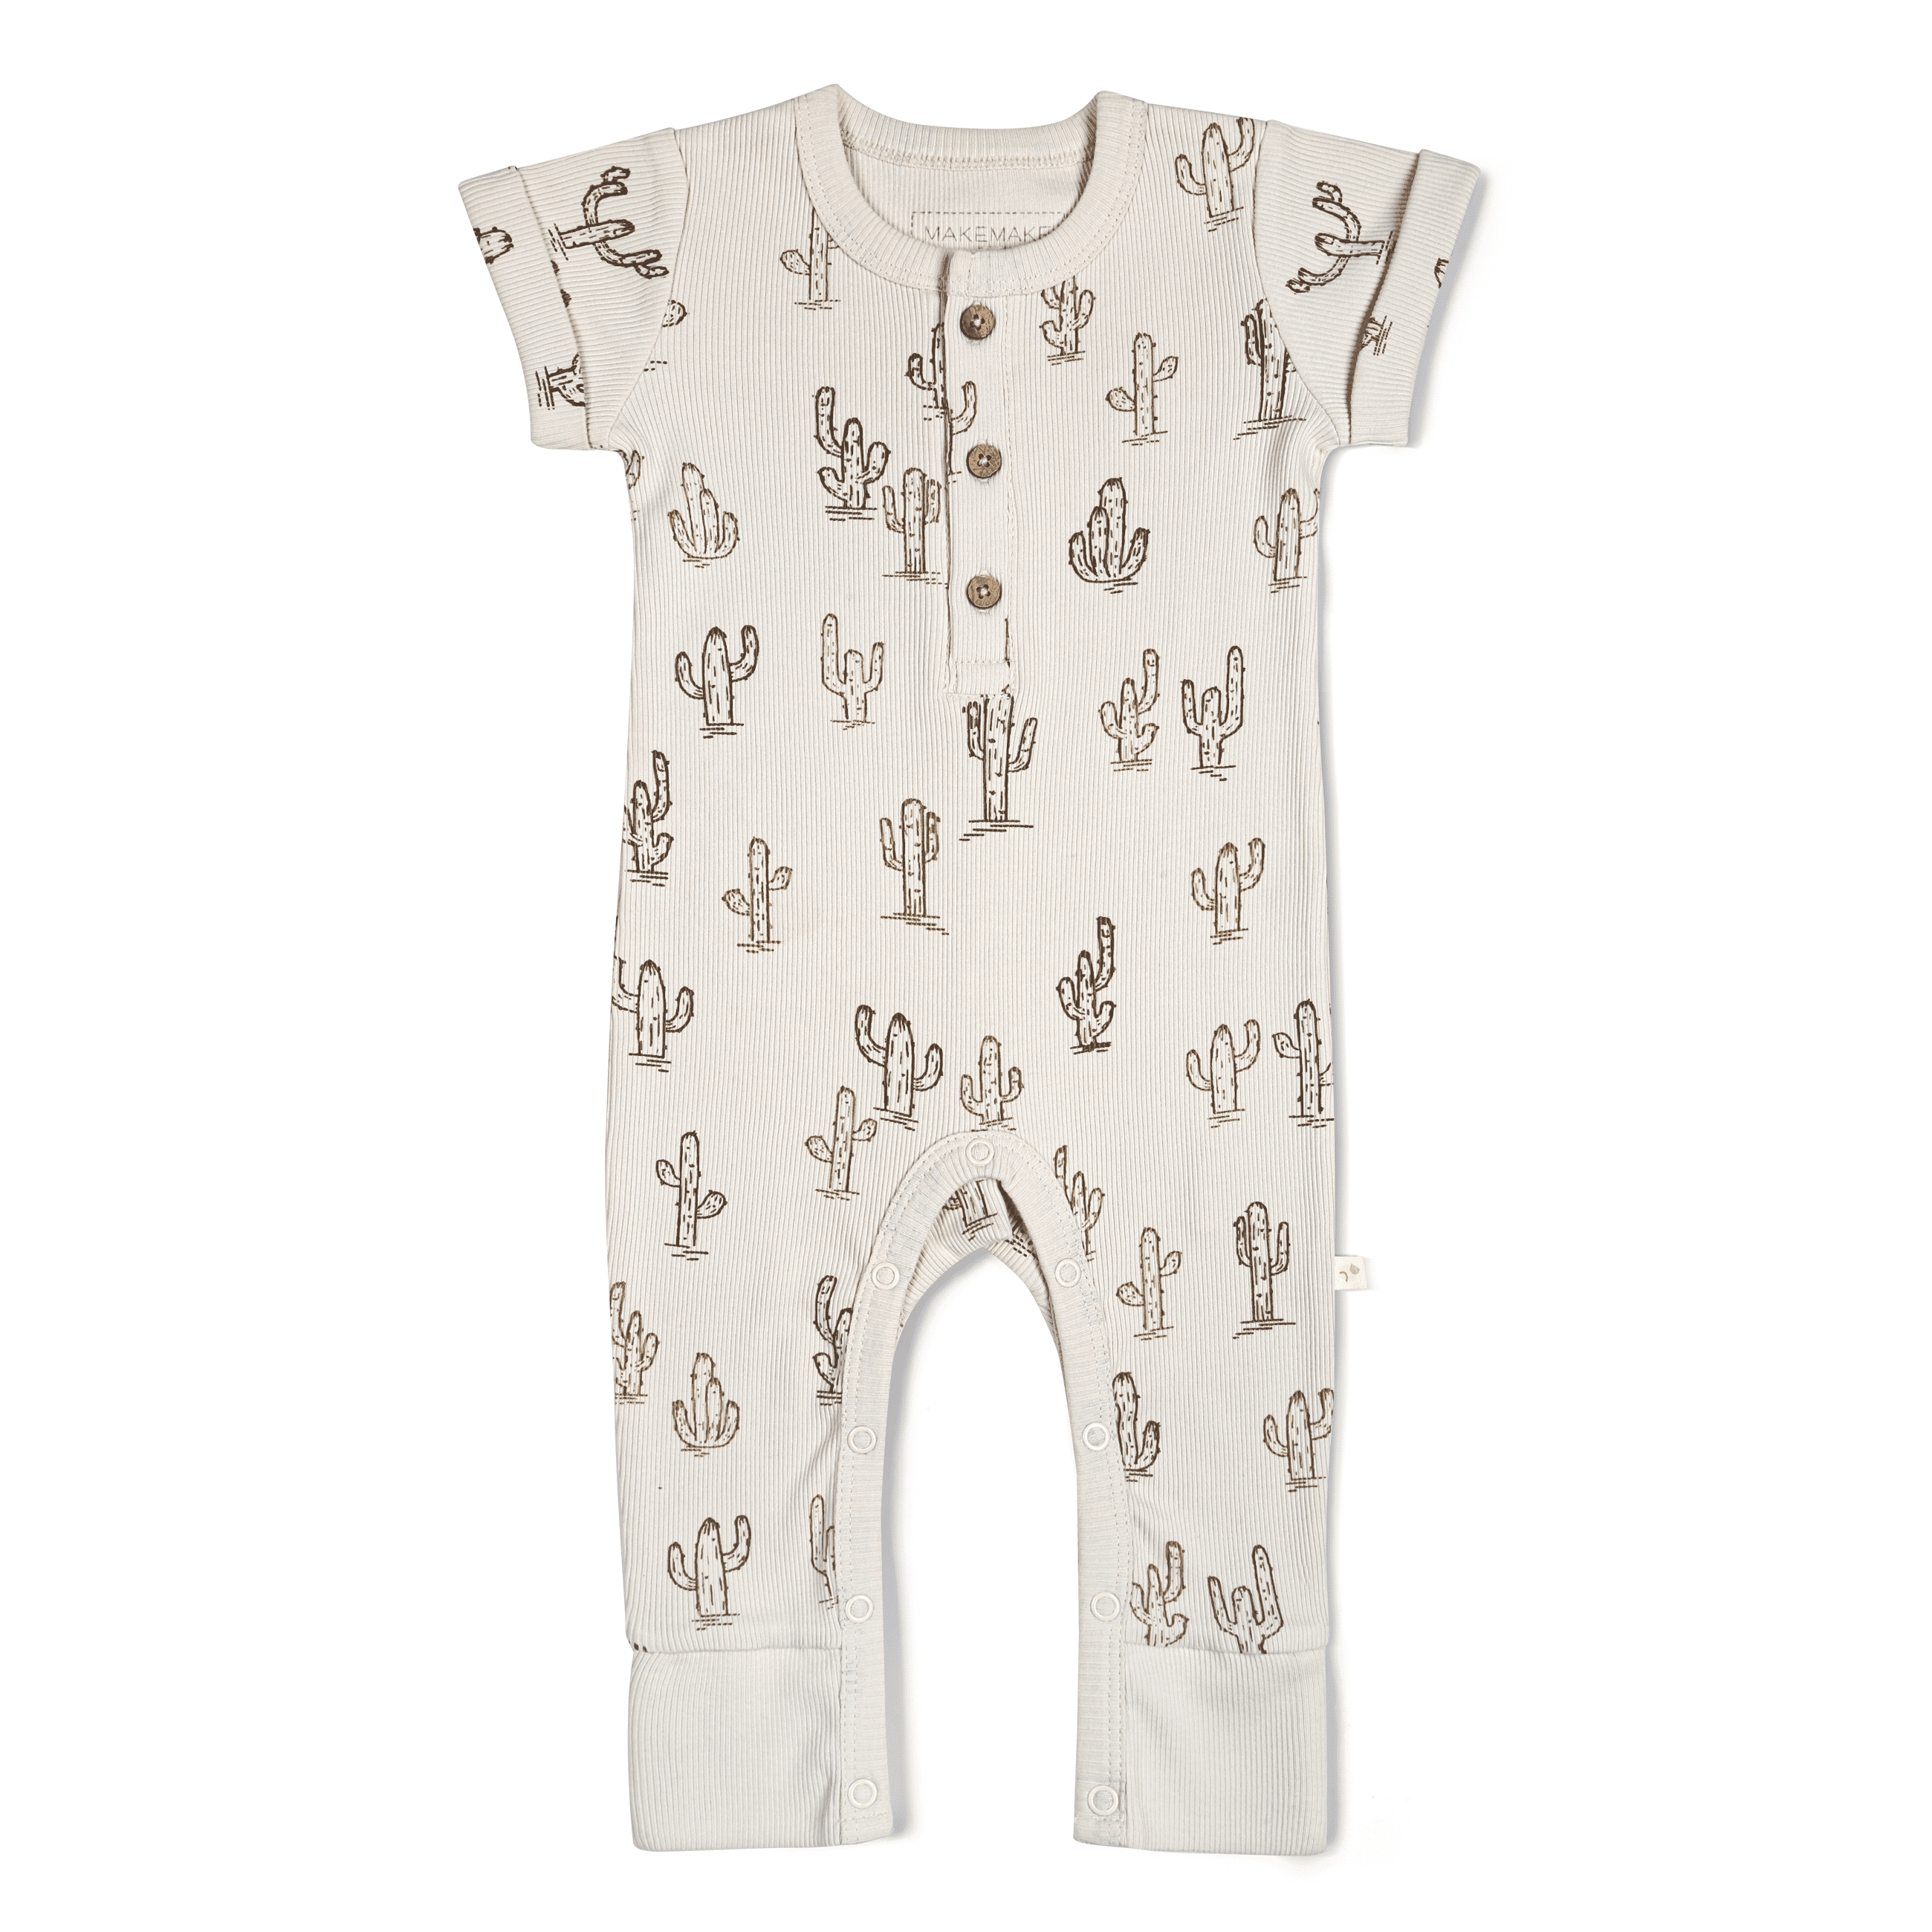 A white and brown Makemake Organics Organic Short Sleeve Button Romper - Cactus.